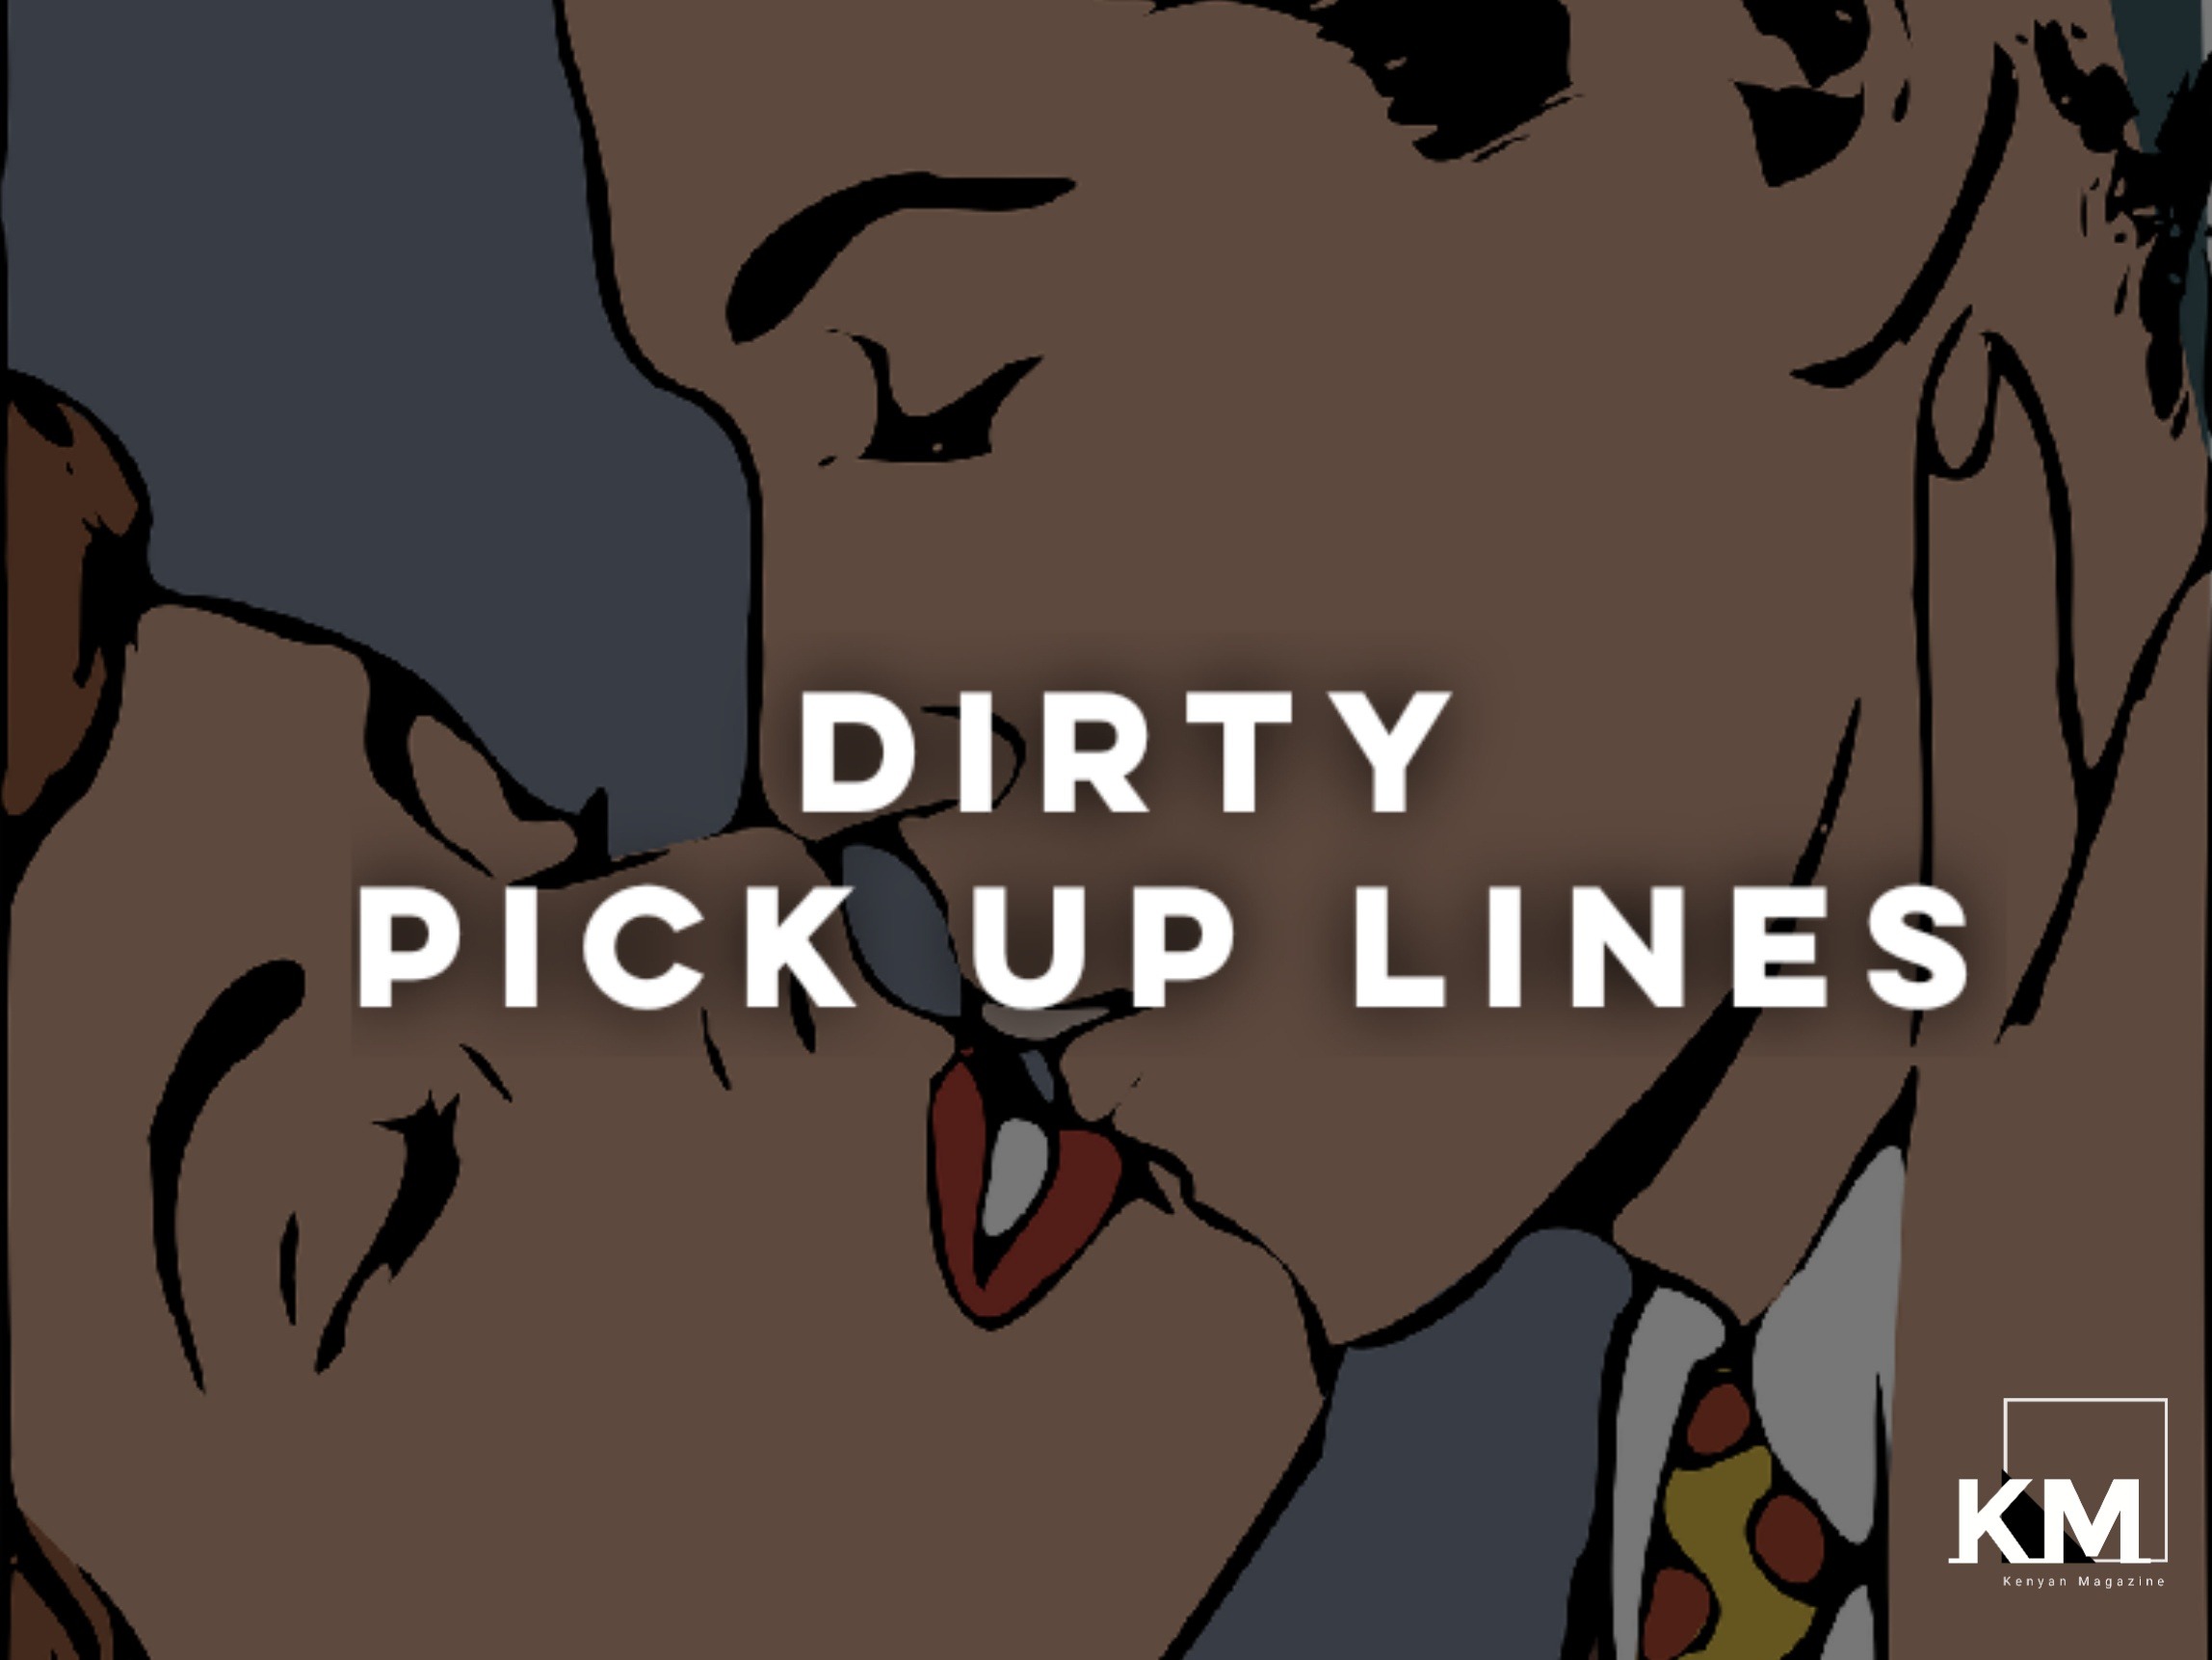 Dirty pick-up lines